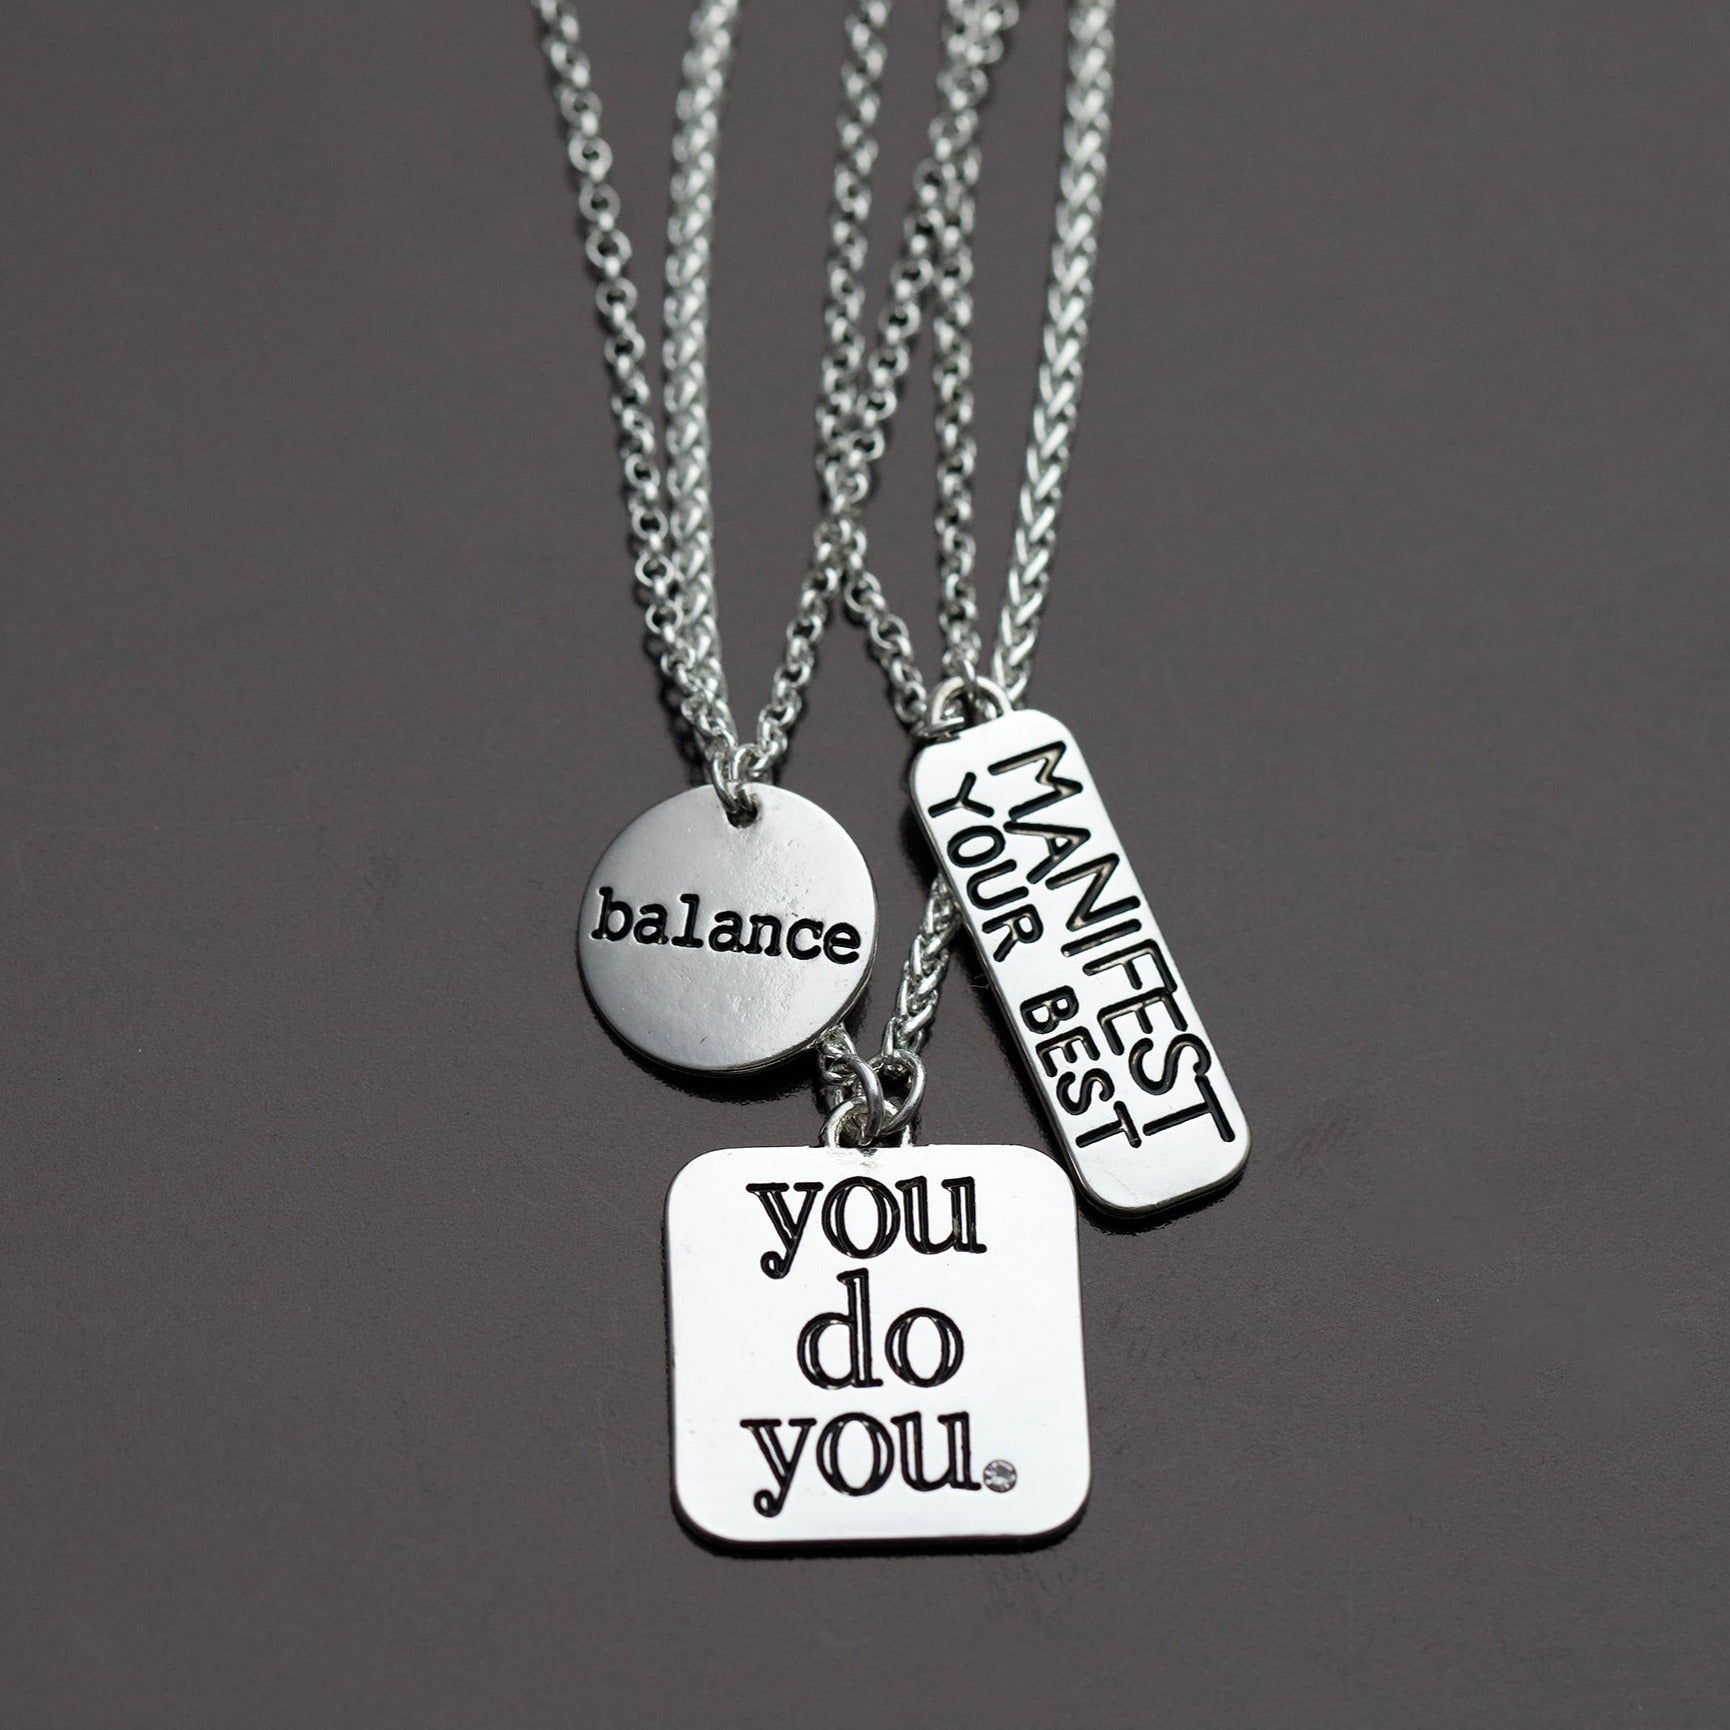 PowHERful 3 Piece Charm Set in Silver - "Manifest Your Best" "You Do You" "Balance" - GB Exclusive - Goody Beads